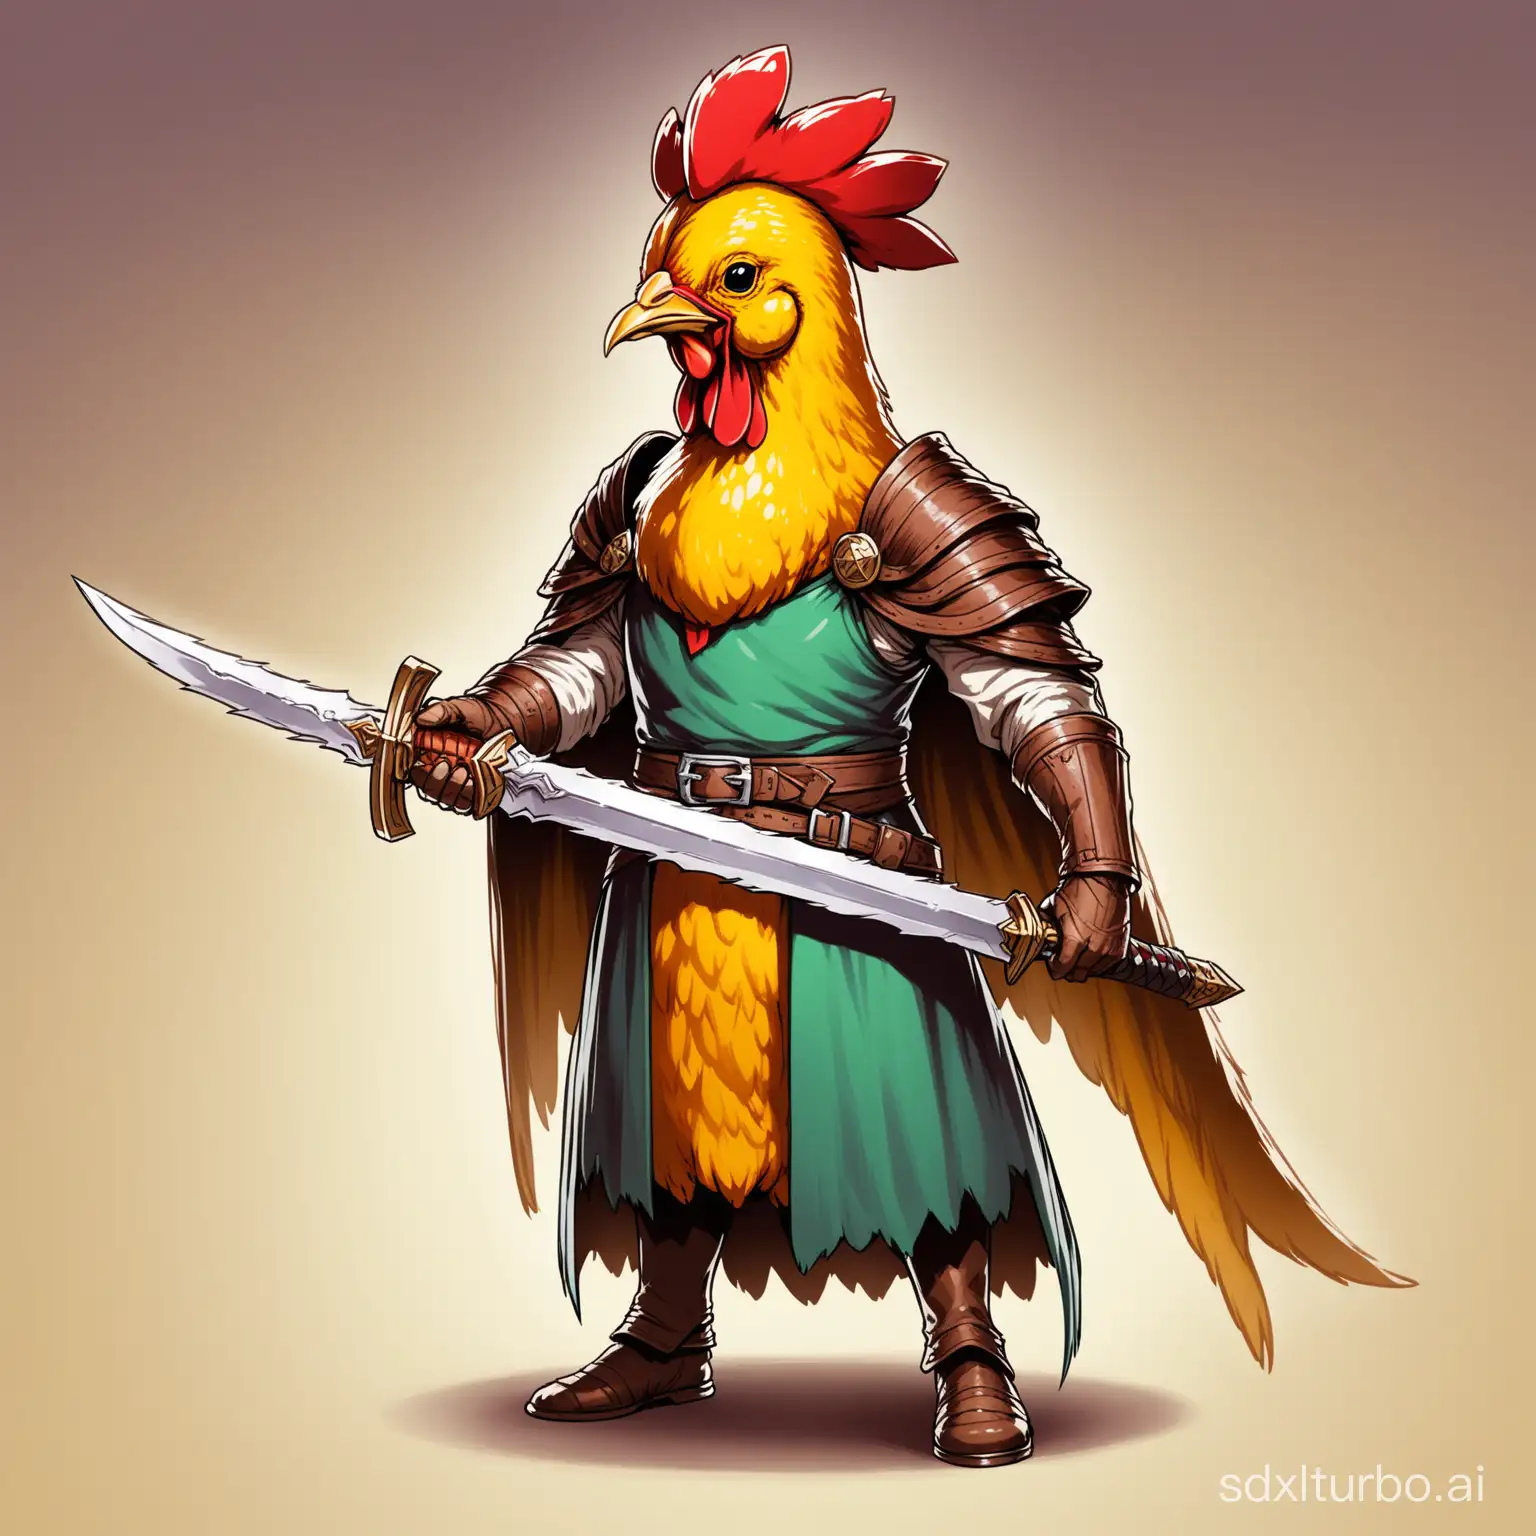 Fantasy-Human-with-Chicken-Head-Holding-Sword-DD-Character-Art